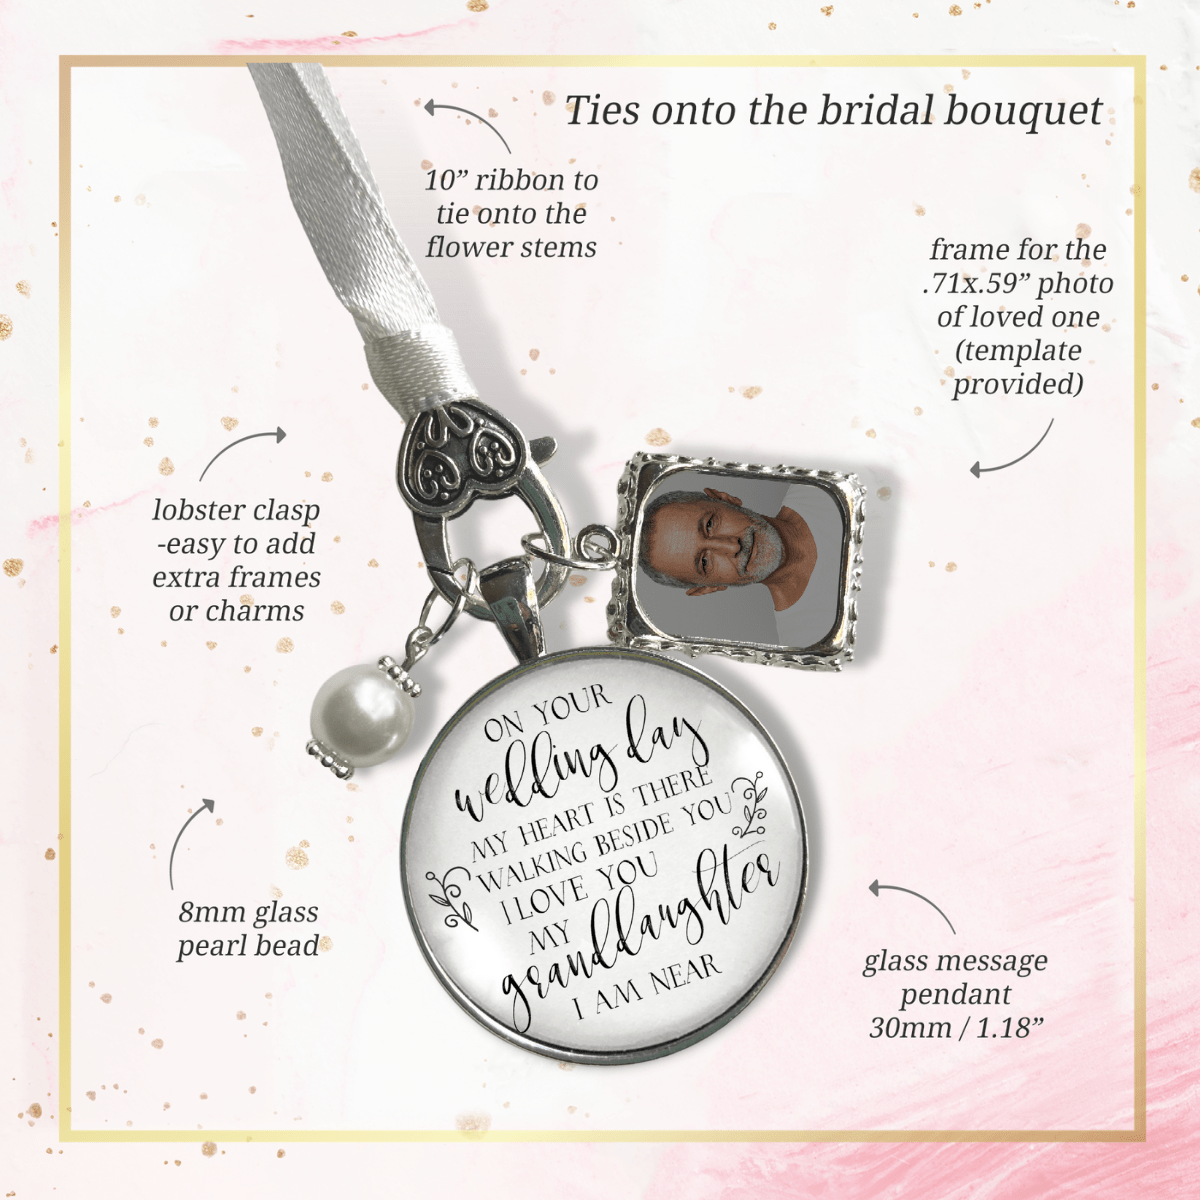 On Your Wedding Day MY Heart Is There Walking Beside You Granddaughter - Memorial Bouquet Charm, Silver, White Glass, White Pearl  Bouquet Charm - Gutsy Goodness Handmade Jewelry